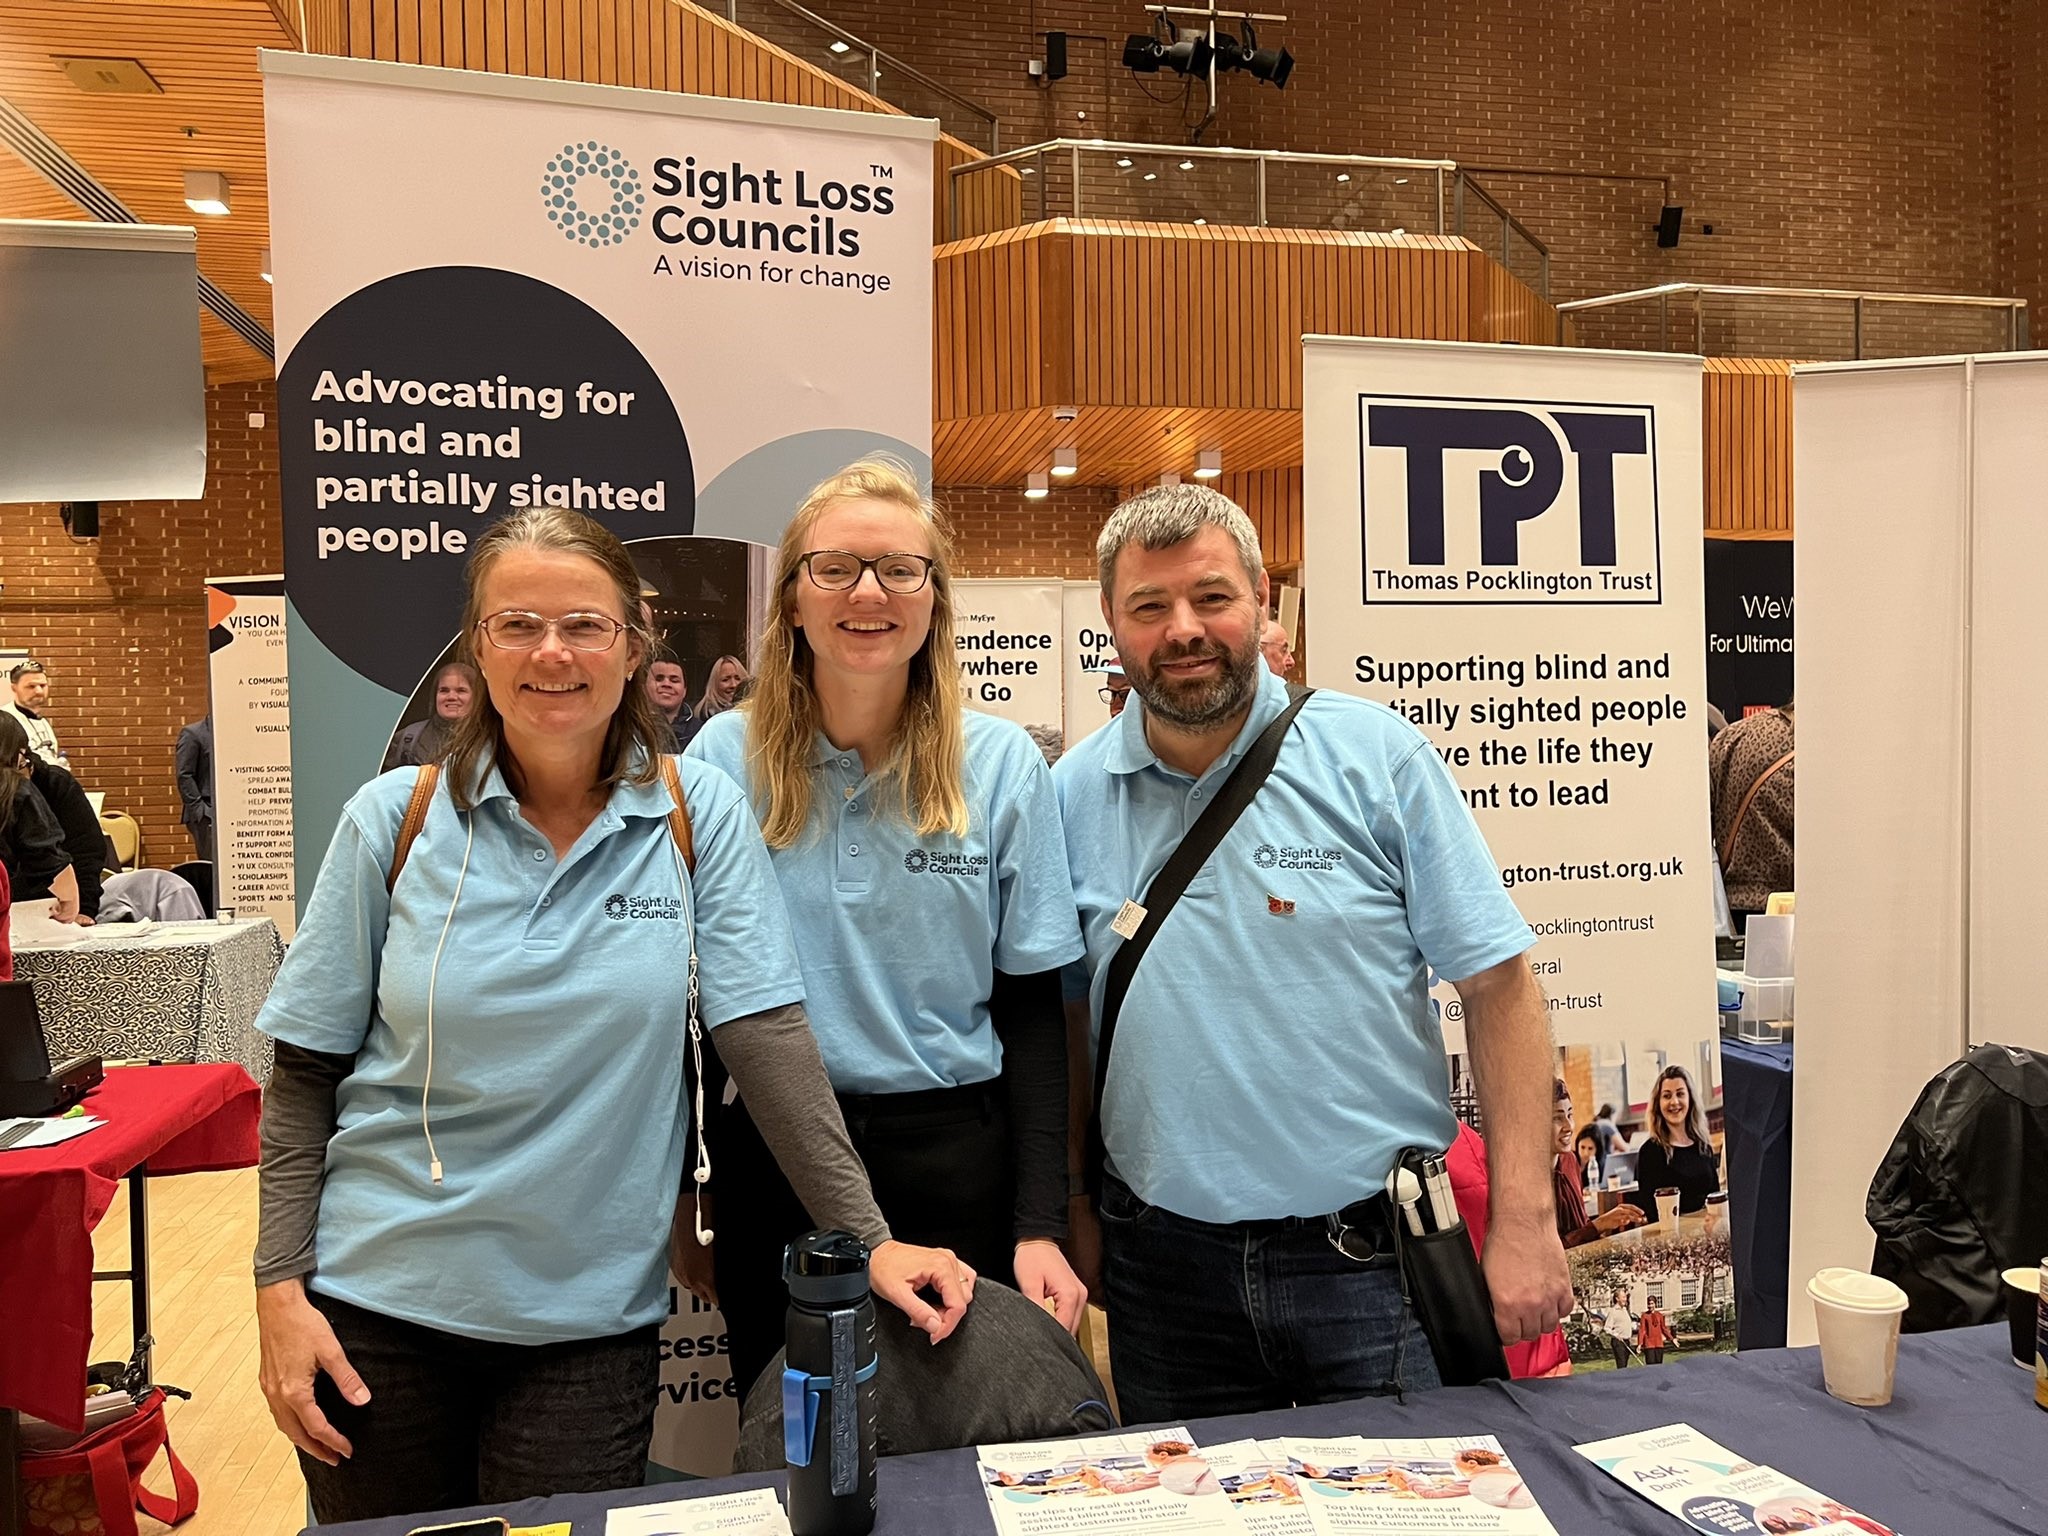 Image shows London SLC members Vicky and Steve with Senior Engagement Manager Lucy. They are behind a stall and infront of a Sight Loss Council and Thomas Pocklington Trust banner.